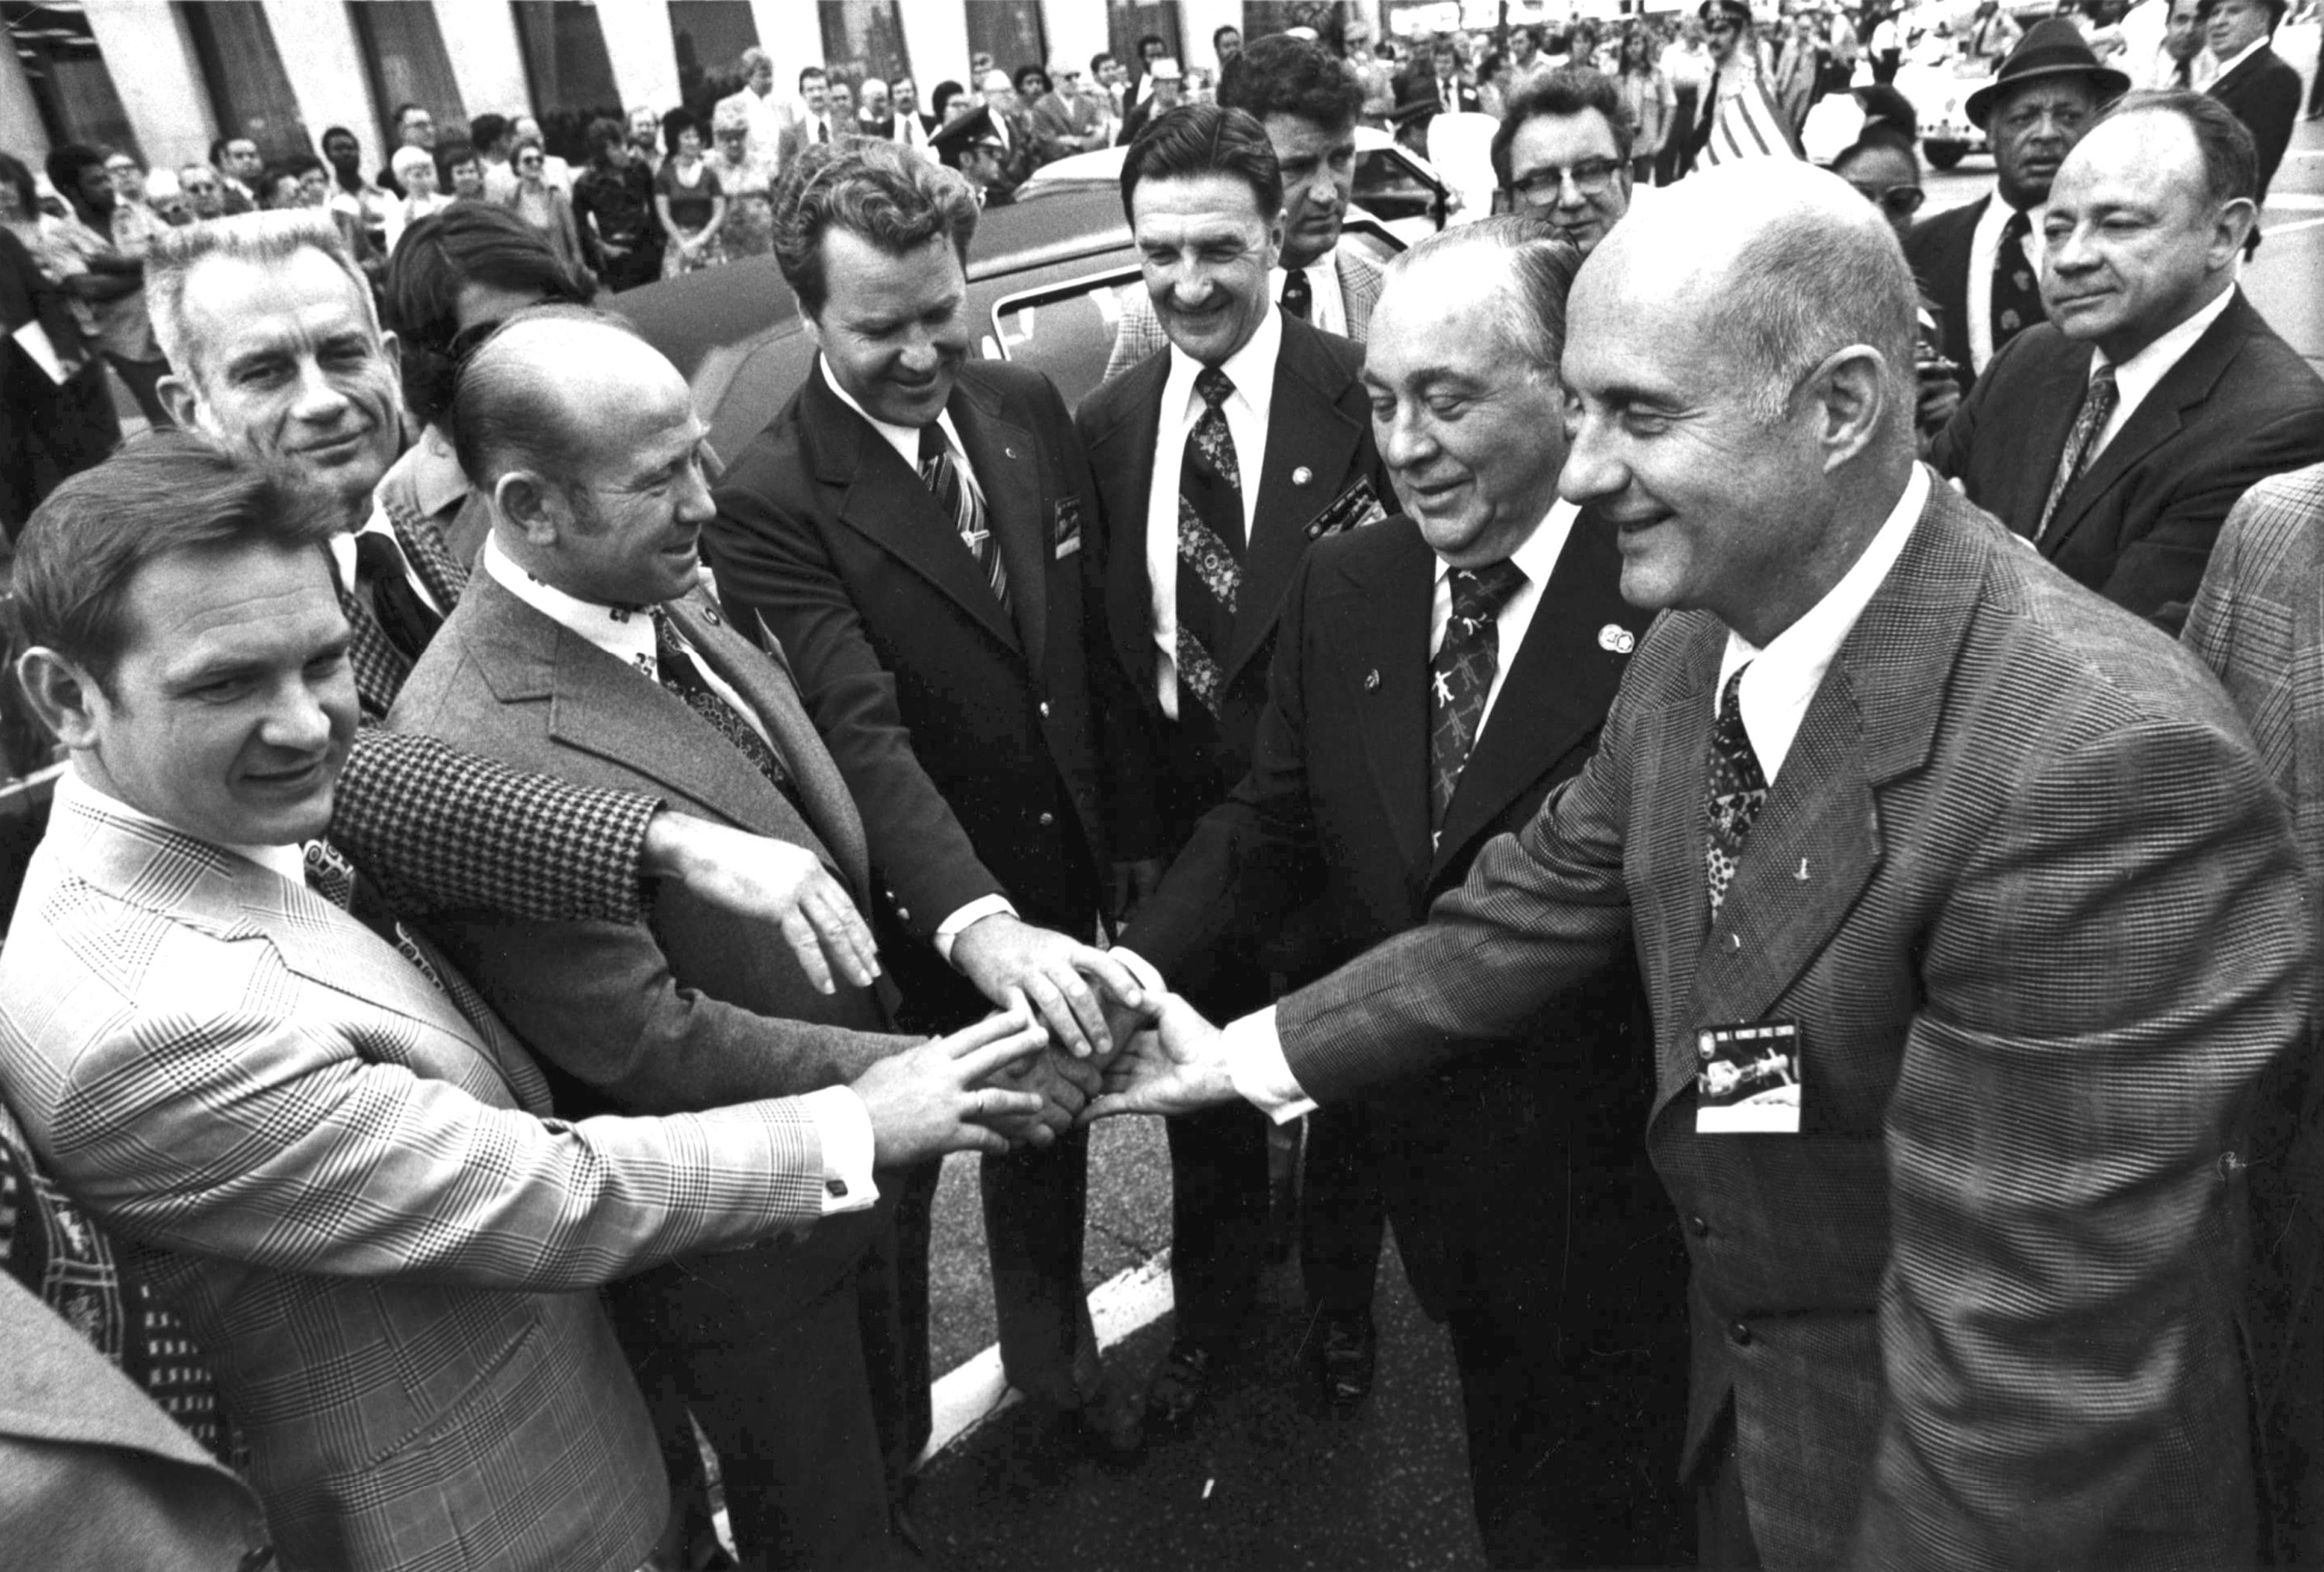 ◄ Members of the Russian and U.S. crews of the Apollo-Soyuz Test Project are honored October 1975 during a parade. Gen. Thomas P. Stafford, right, is joined by Chicago Mayor Richard Daly, second from right.